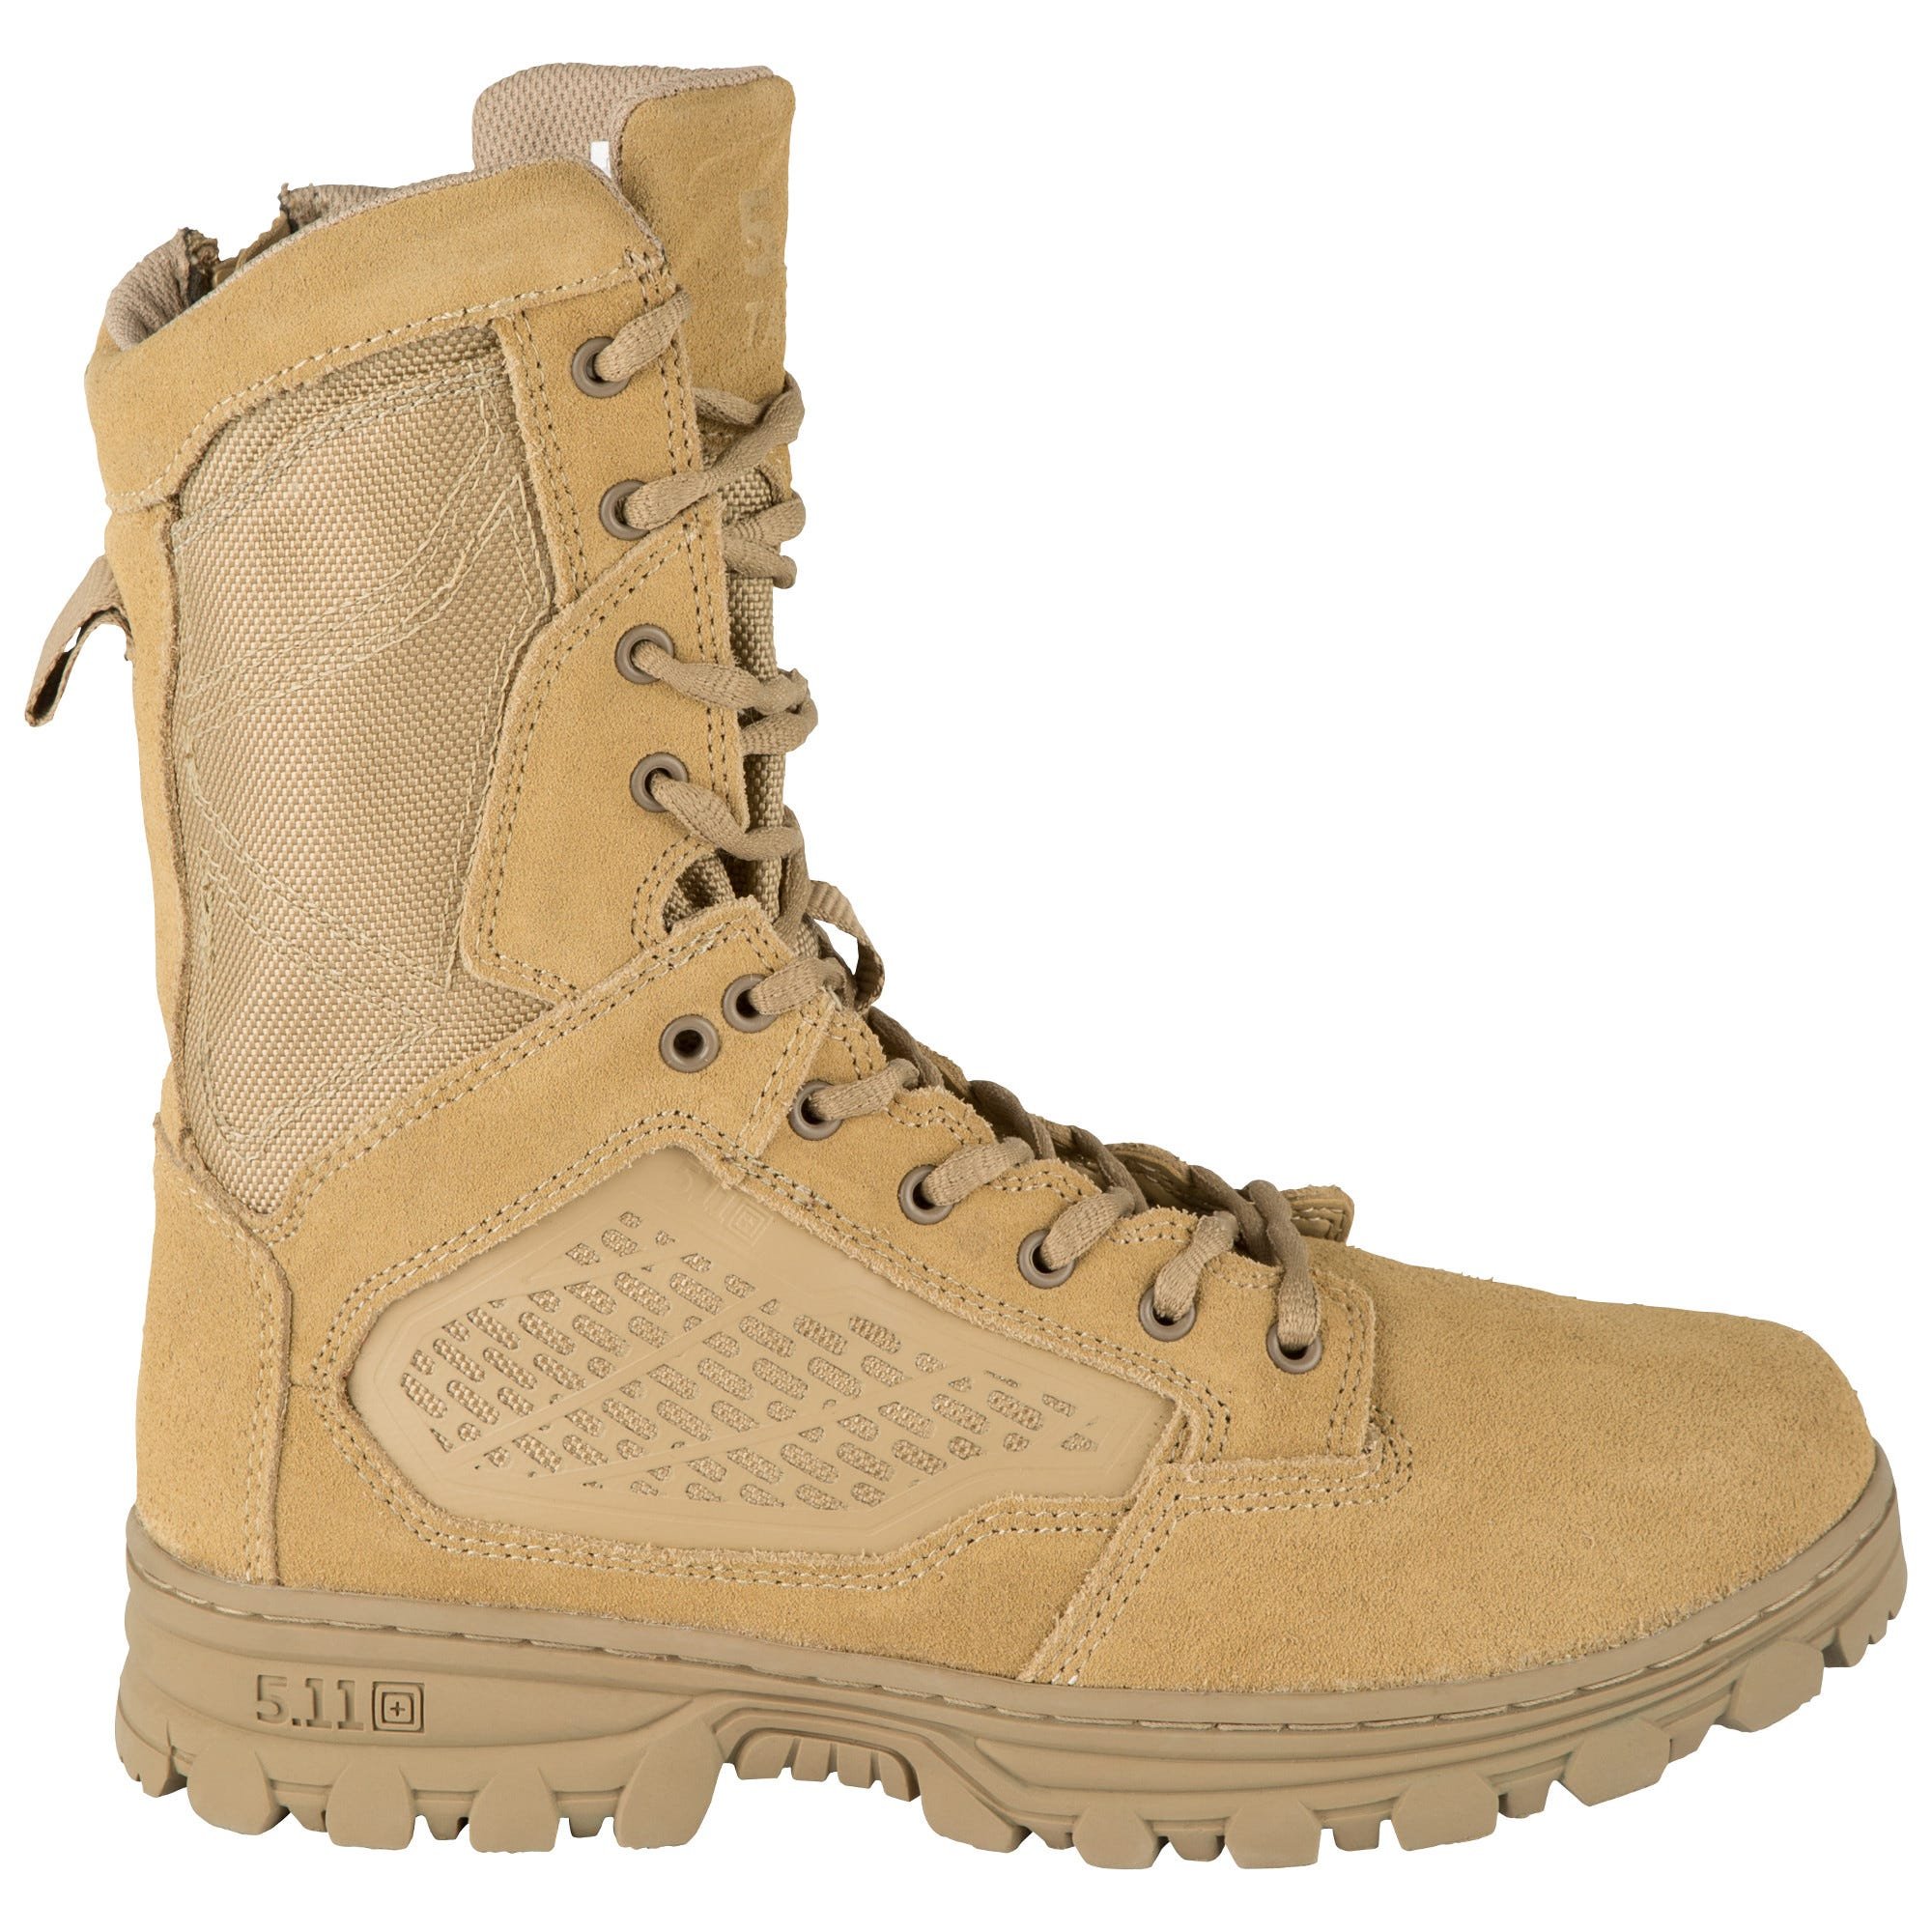 5.11 Work Gear EVO 8-Inch Waterproof Boots, Oil/Slip-Resistant, OrthoLite Insole, Coyote, 4/Regular, Style 12347 - image 3 of 4